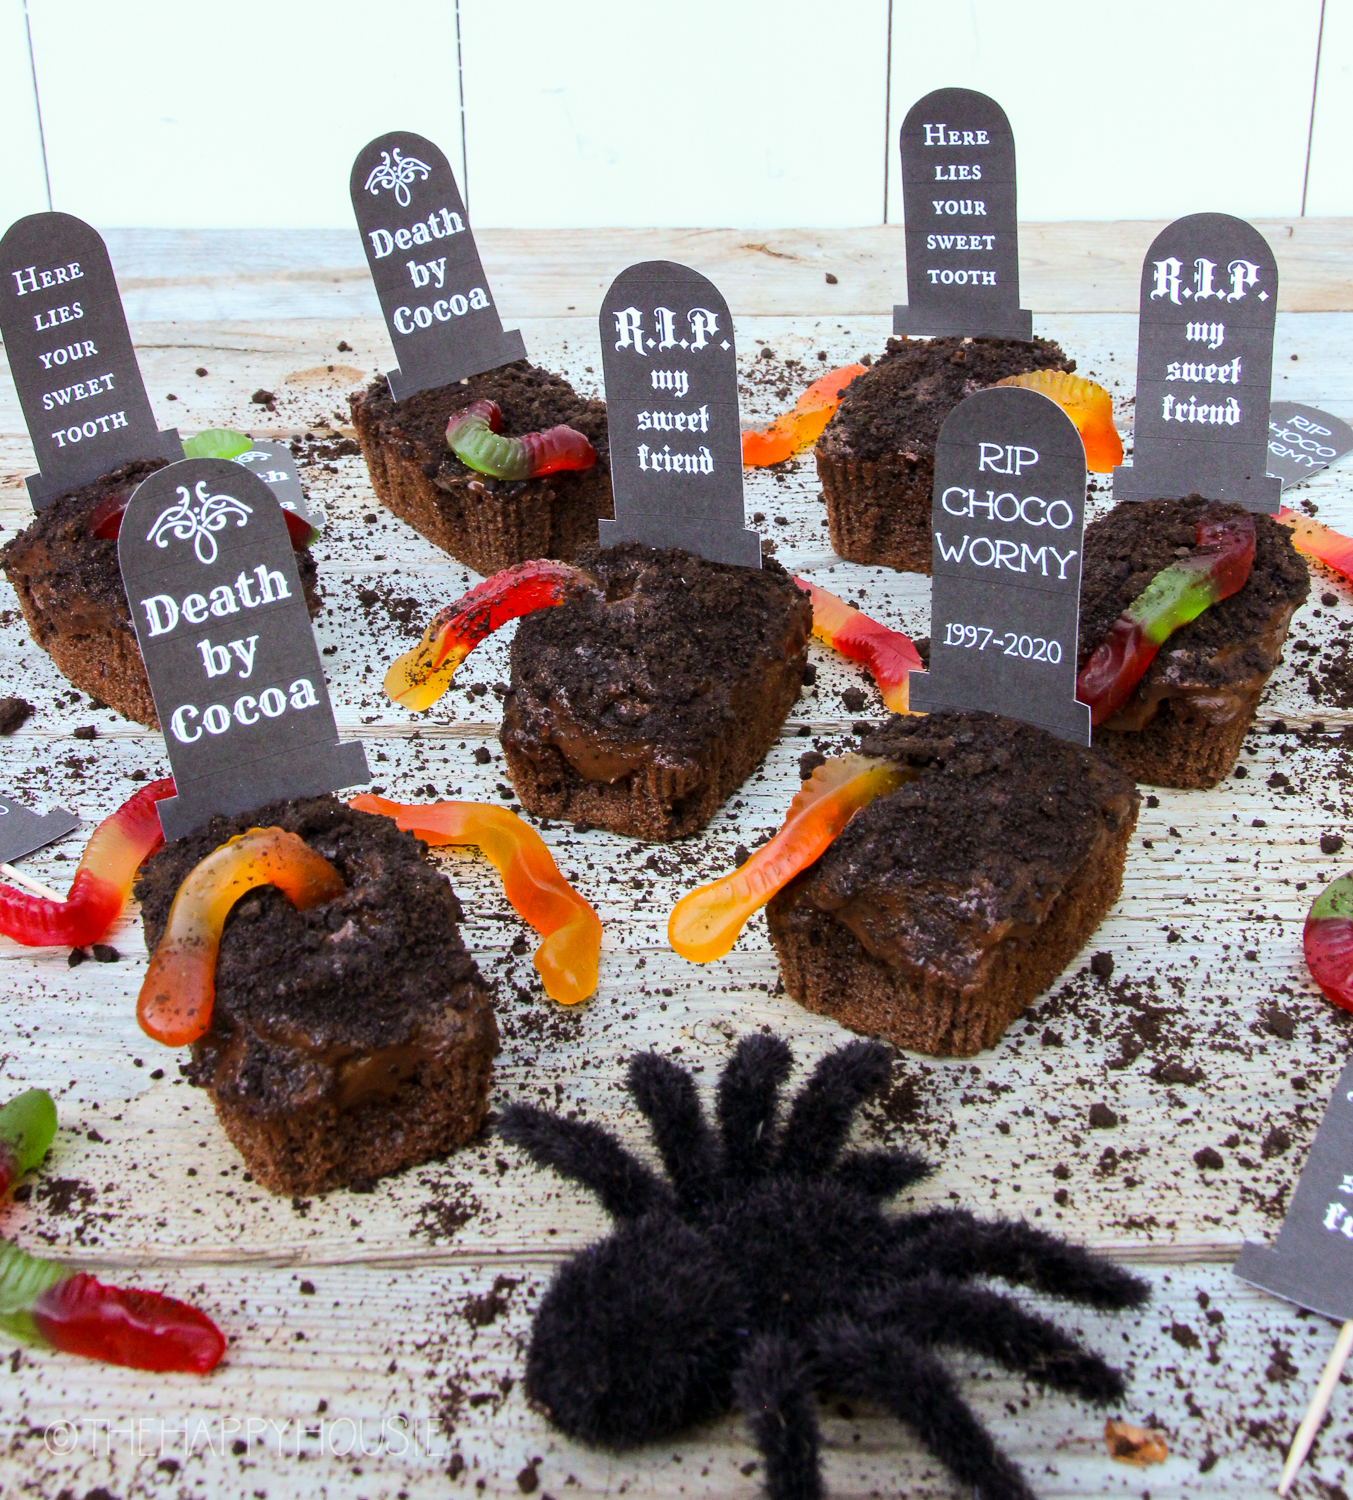 Death By Cocoa and RIP signs on the cupcakes with a black spider in between them.